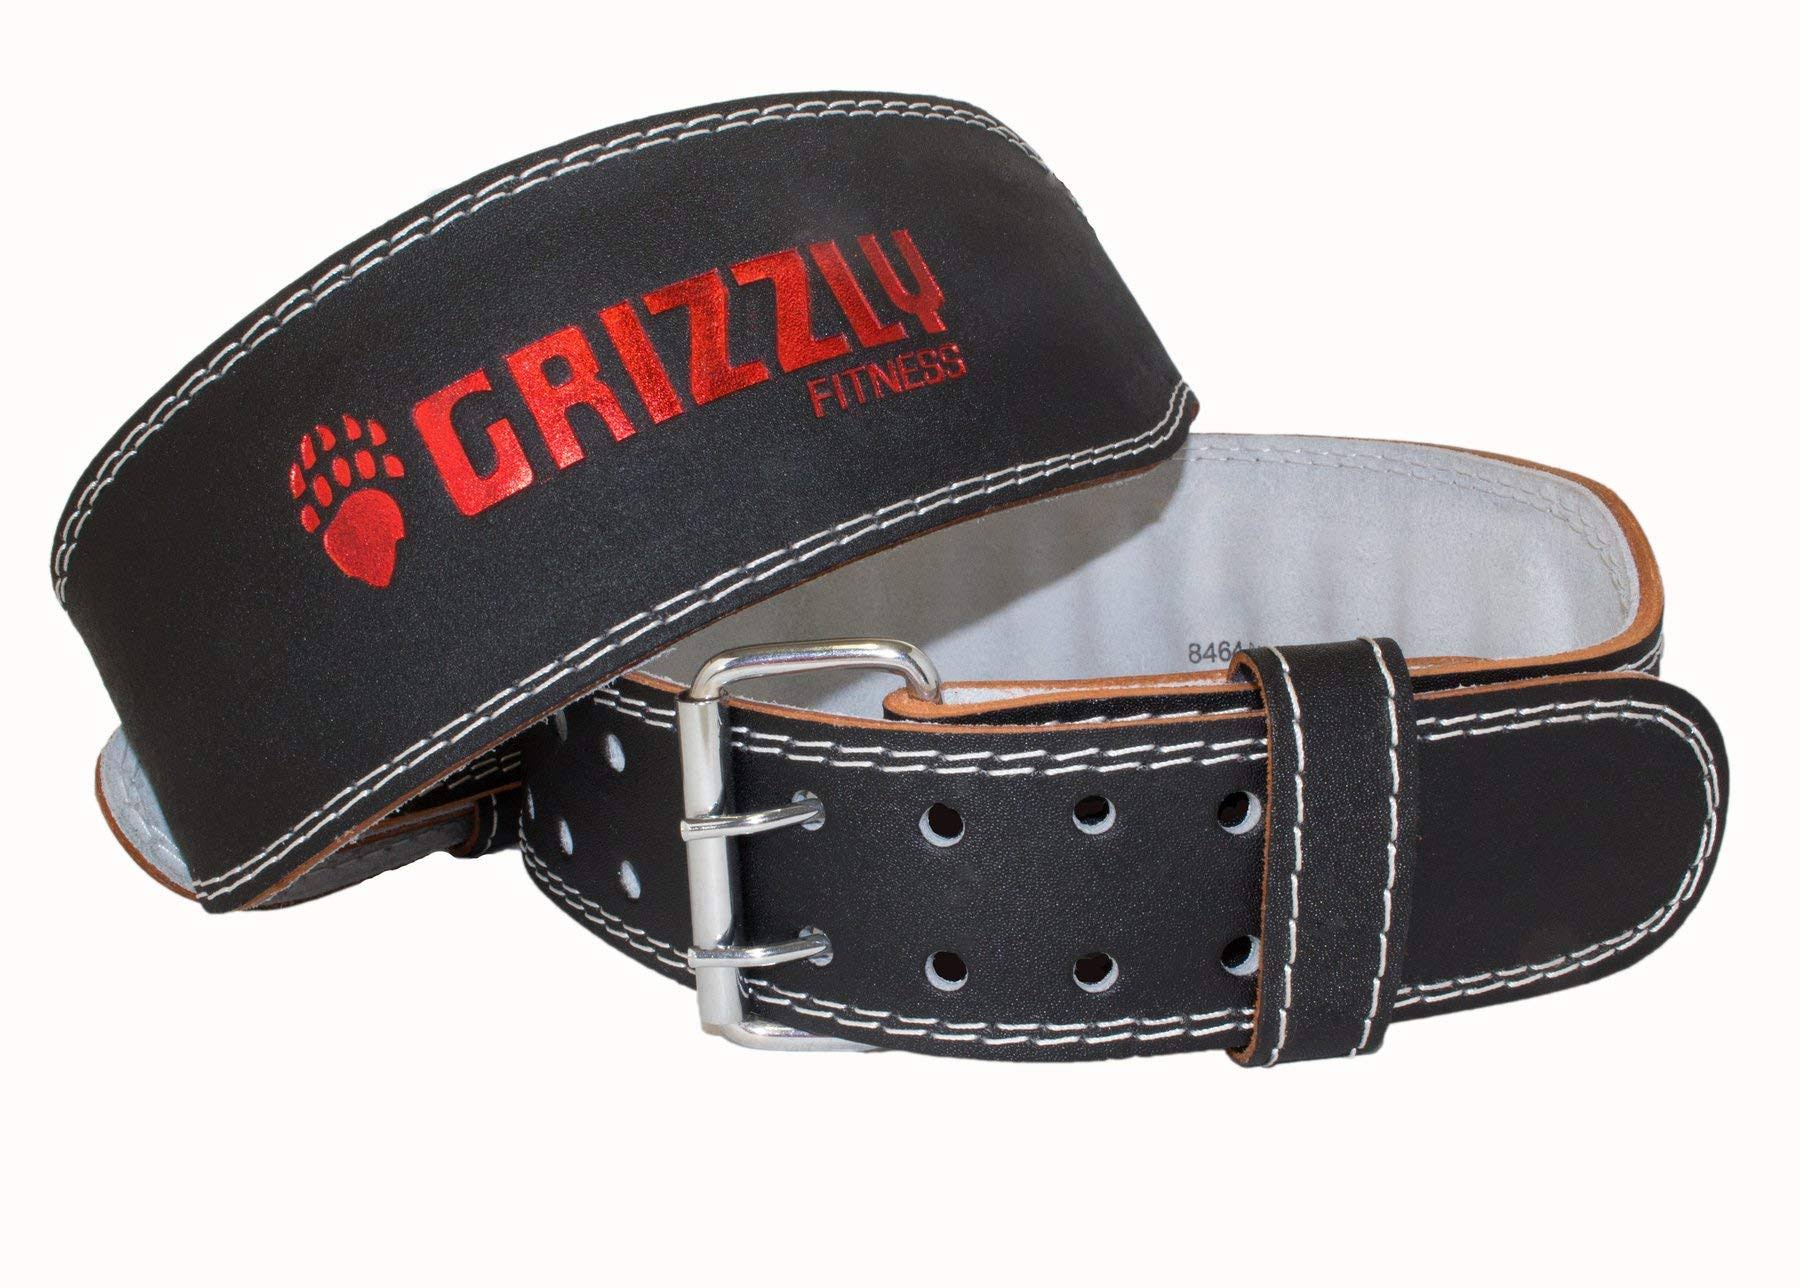 Grizzly Fitness 8466-04 15cm Padded Enforcer Training Belt